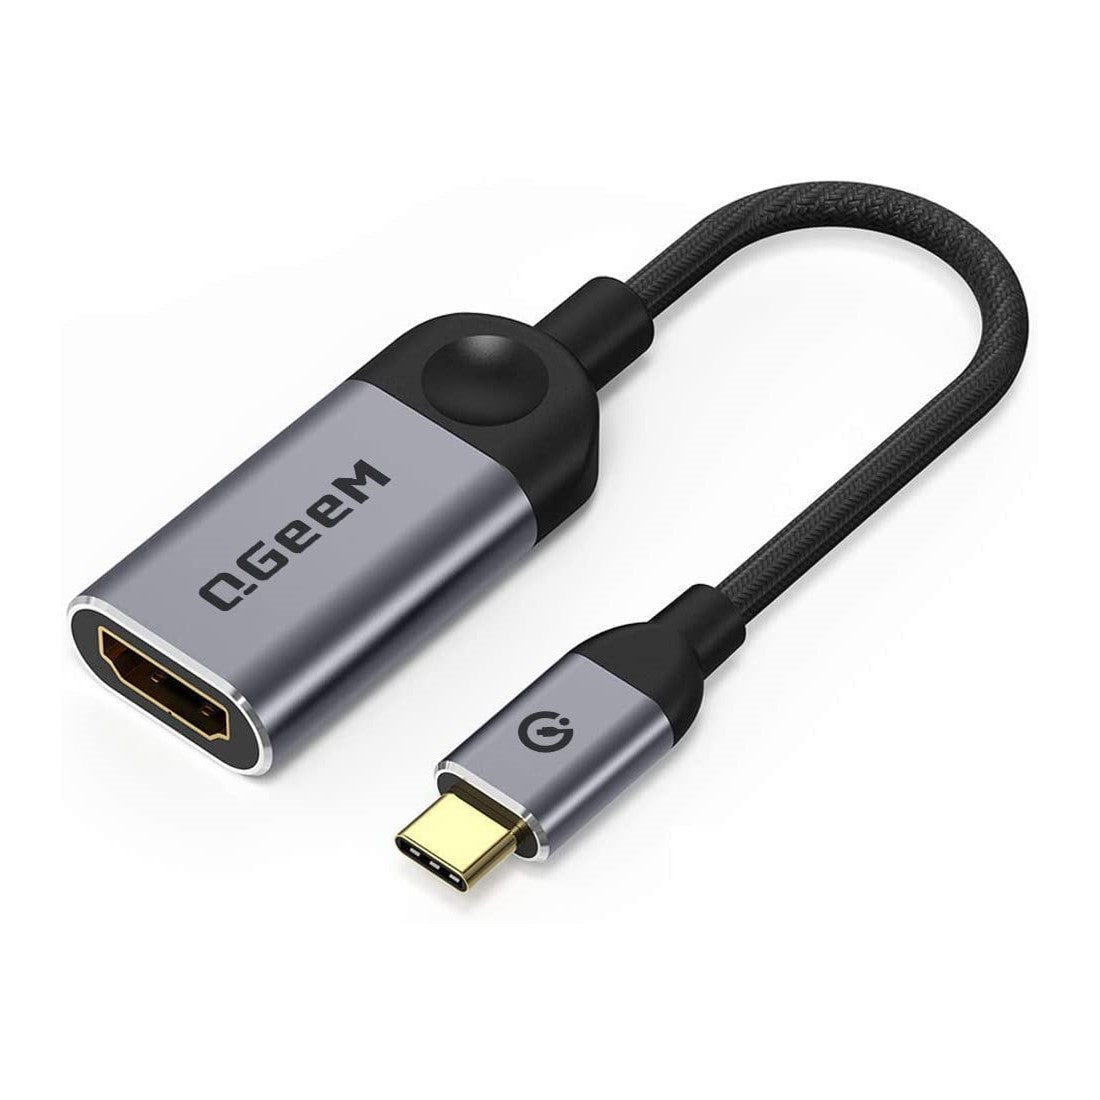 USB Type C to HDMI/VGA Adapter Indonesia